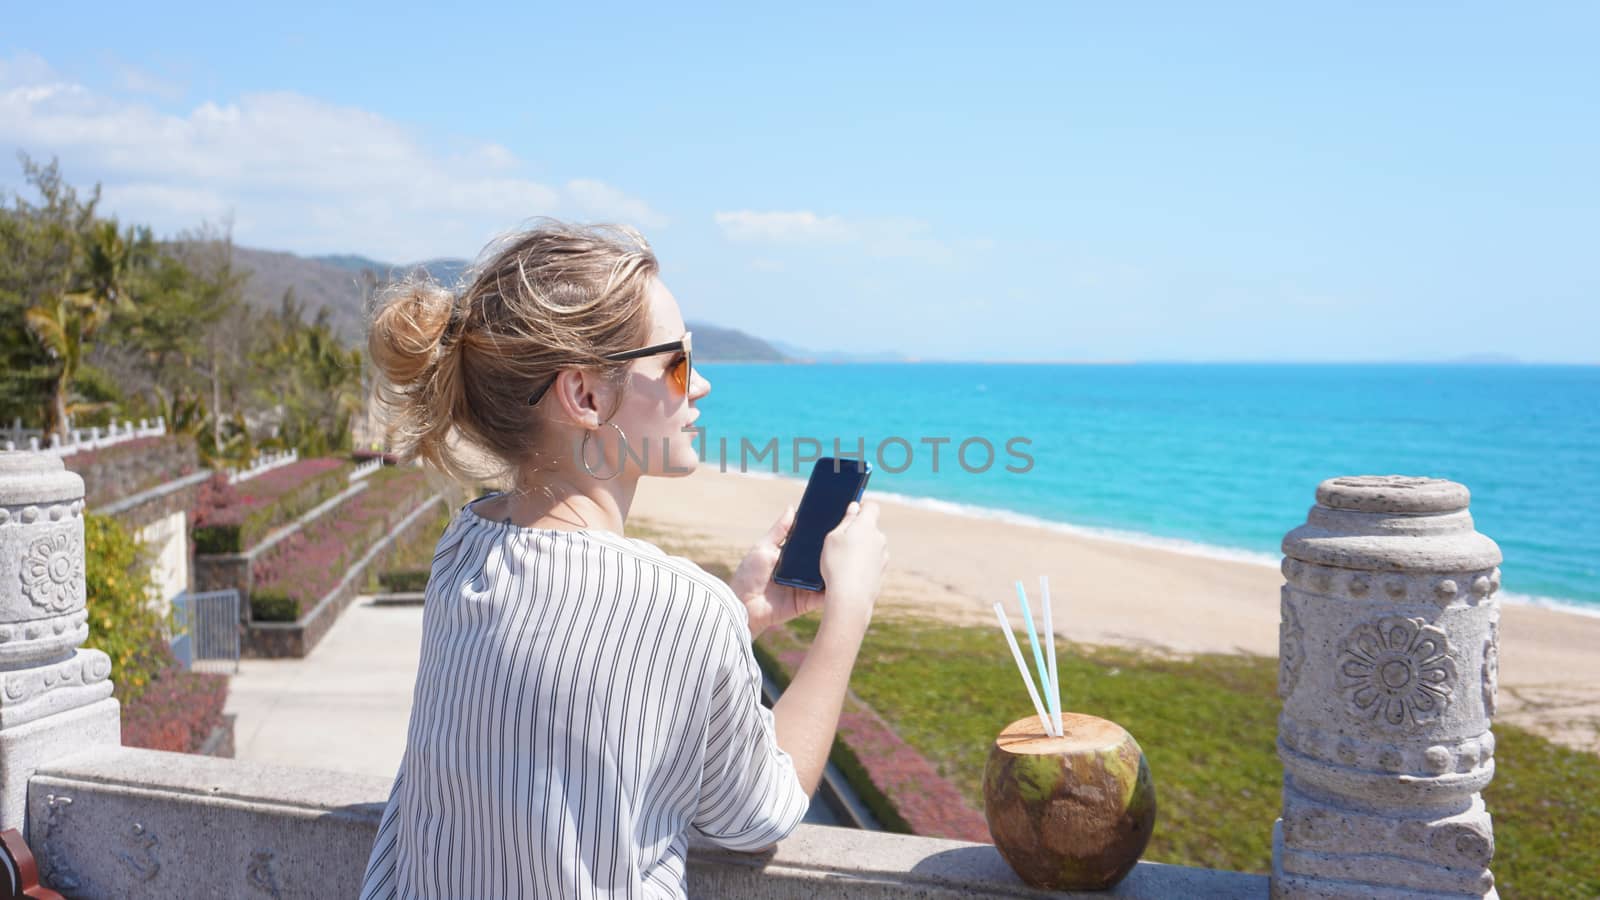 A beautiful young woman on a tropical beach with a phone in her hands by natali_brill